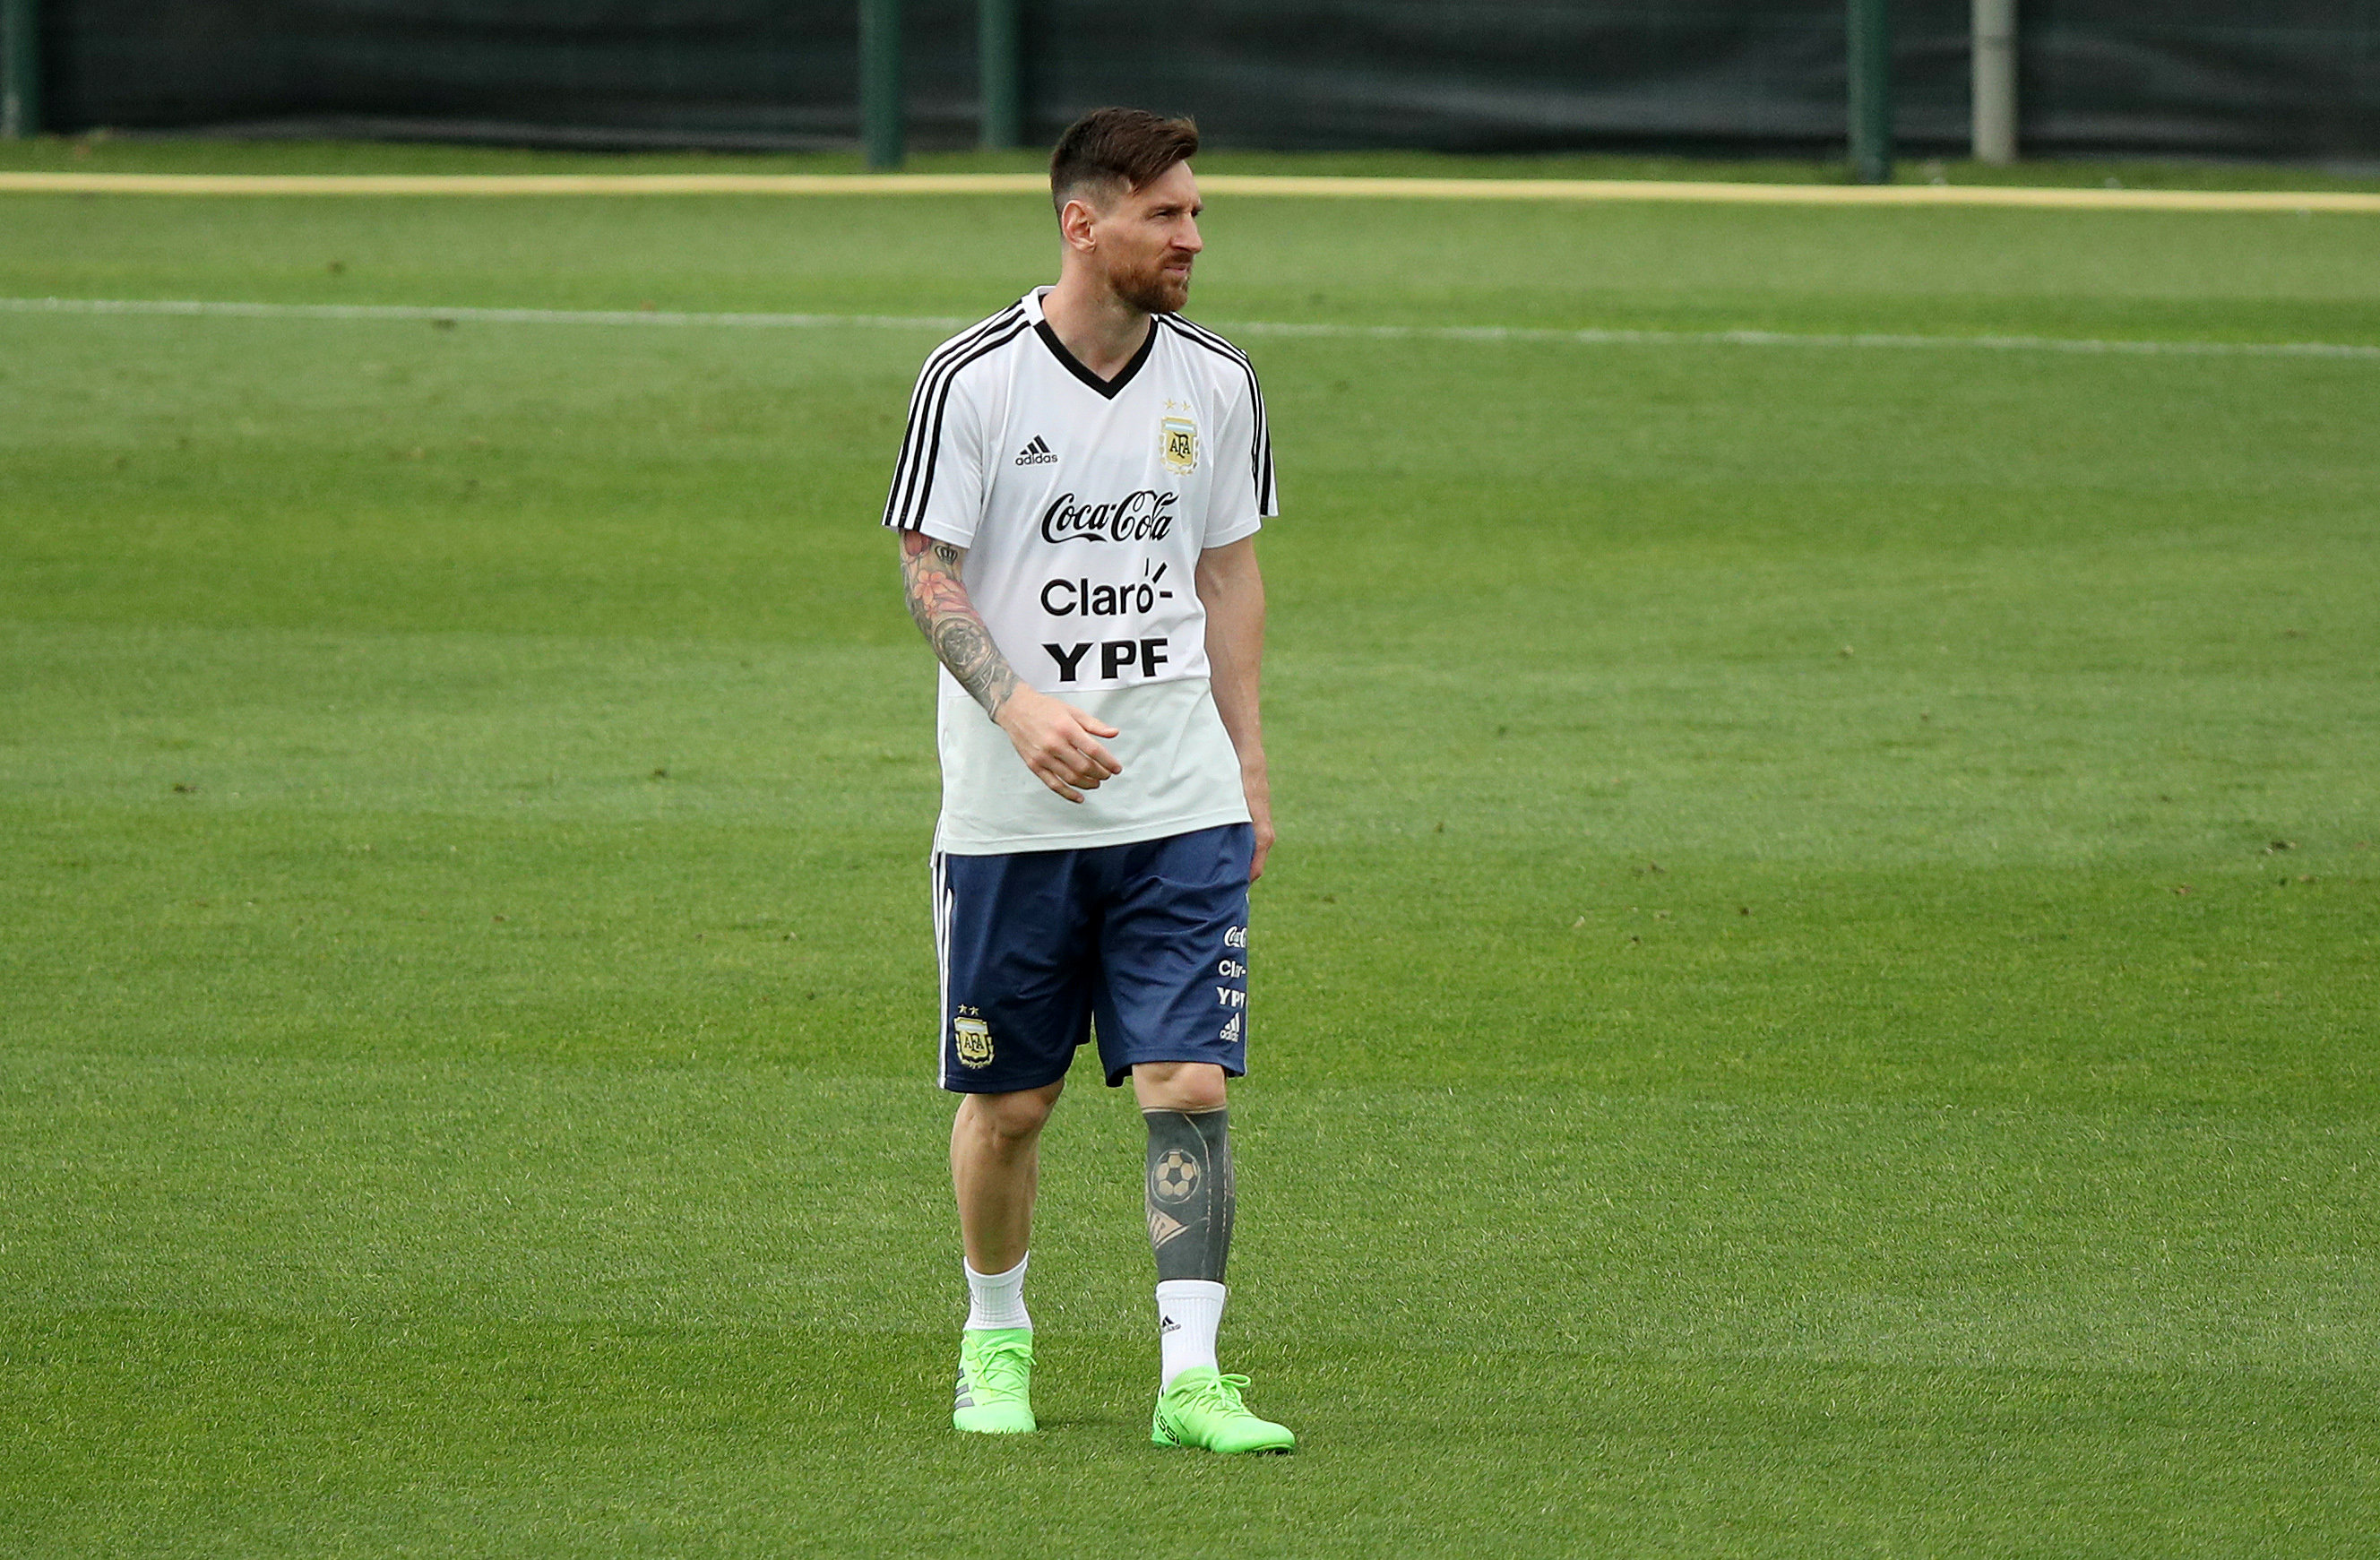 World Cup: Time running out for Messi to lift the ‘Big One’